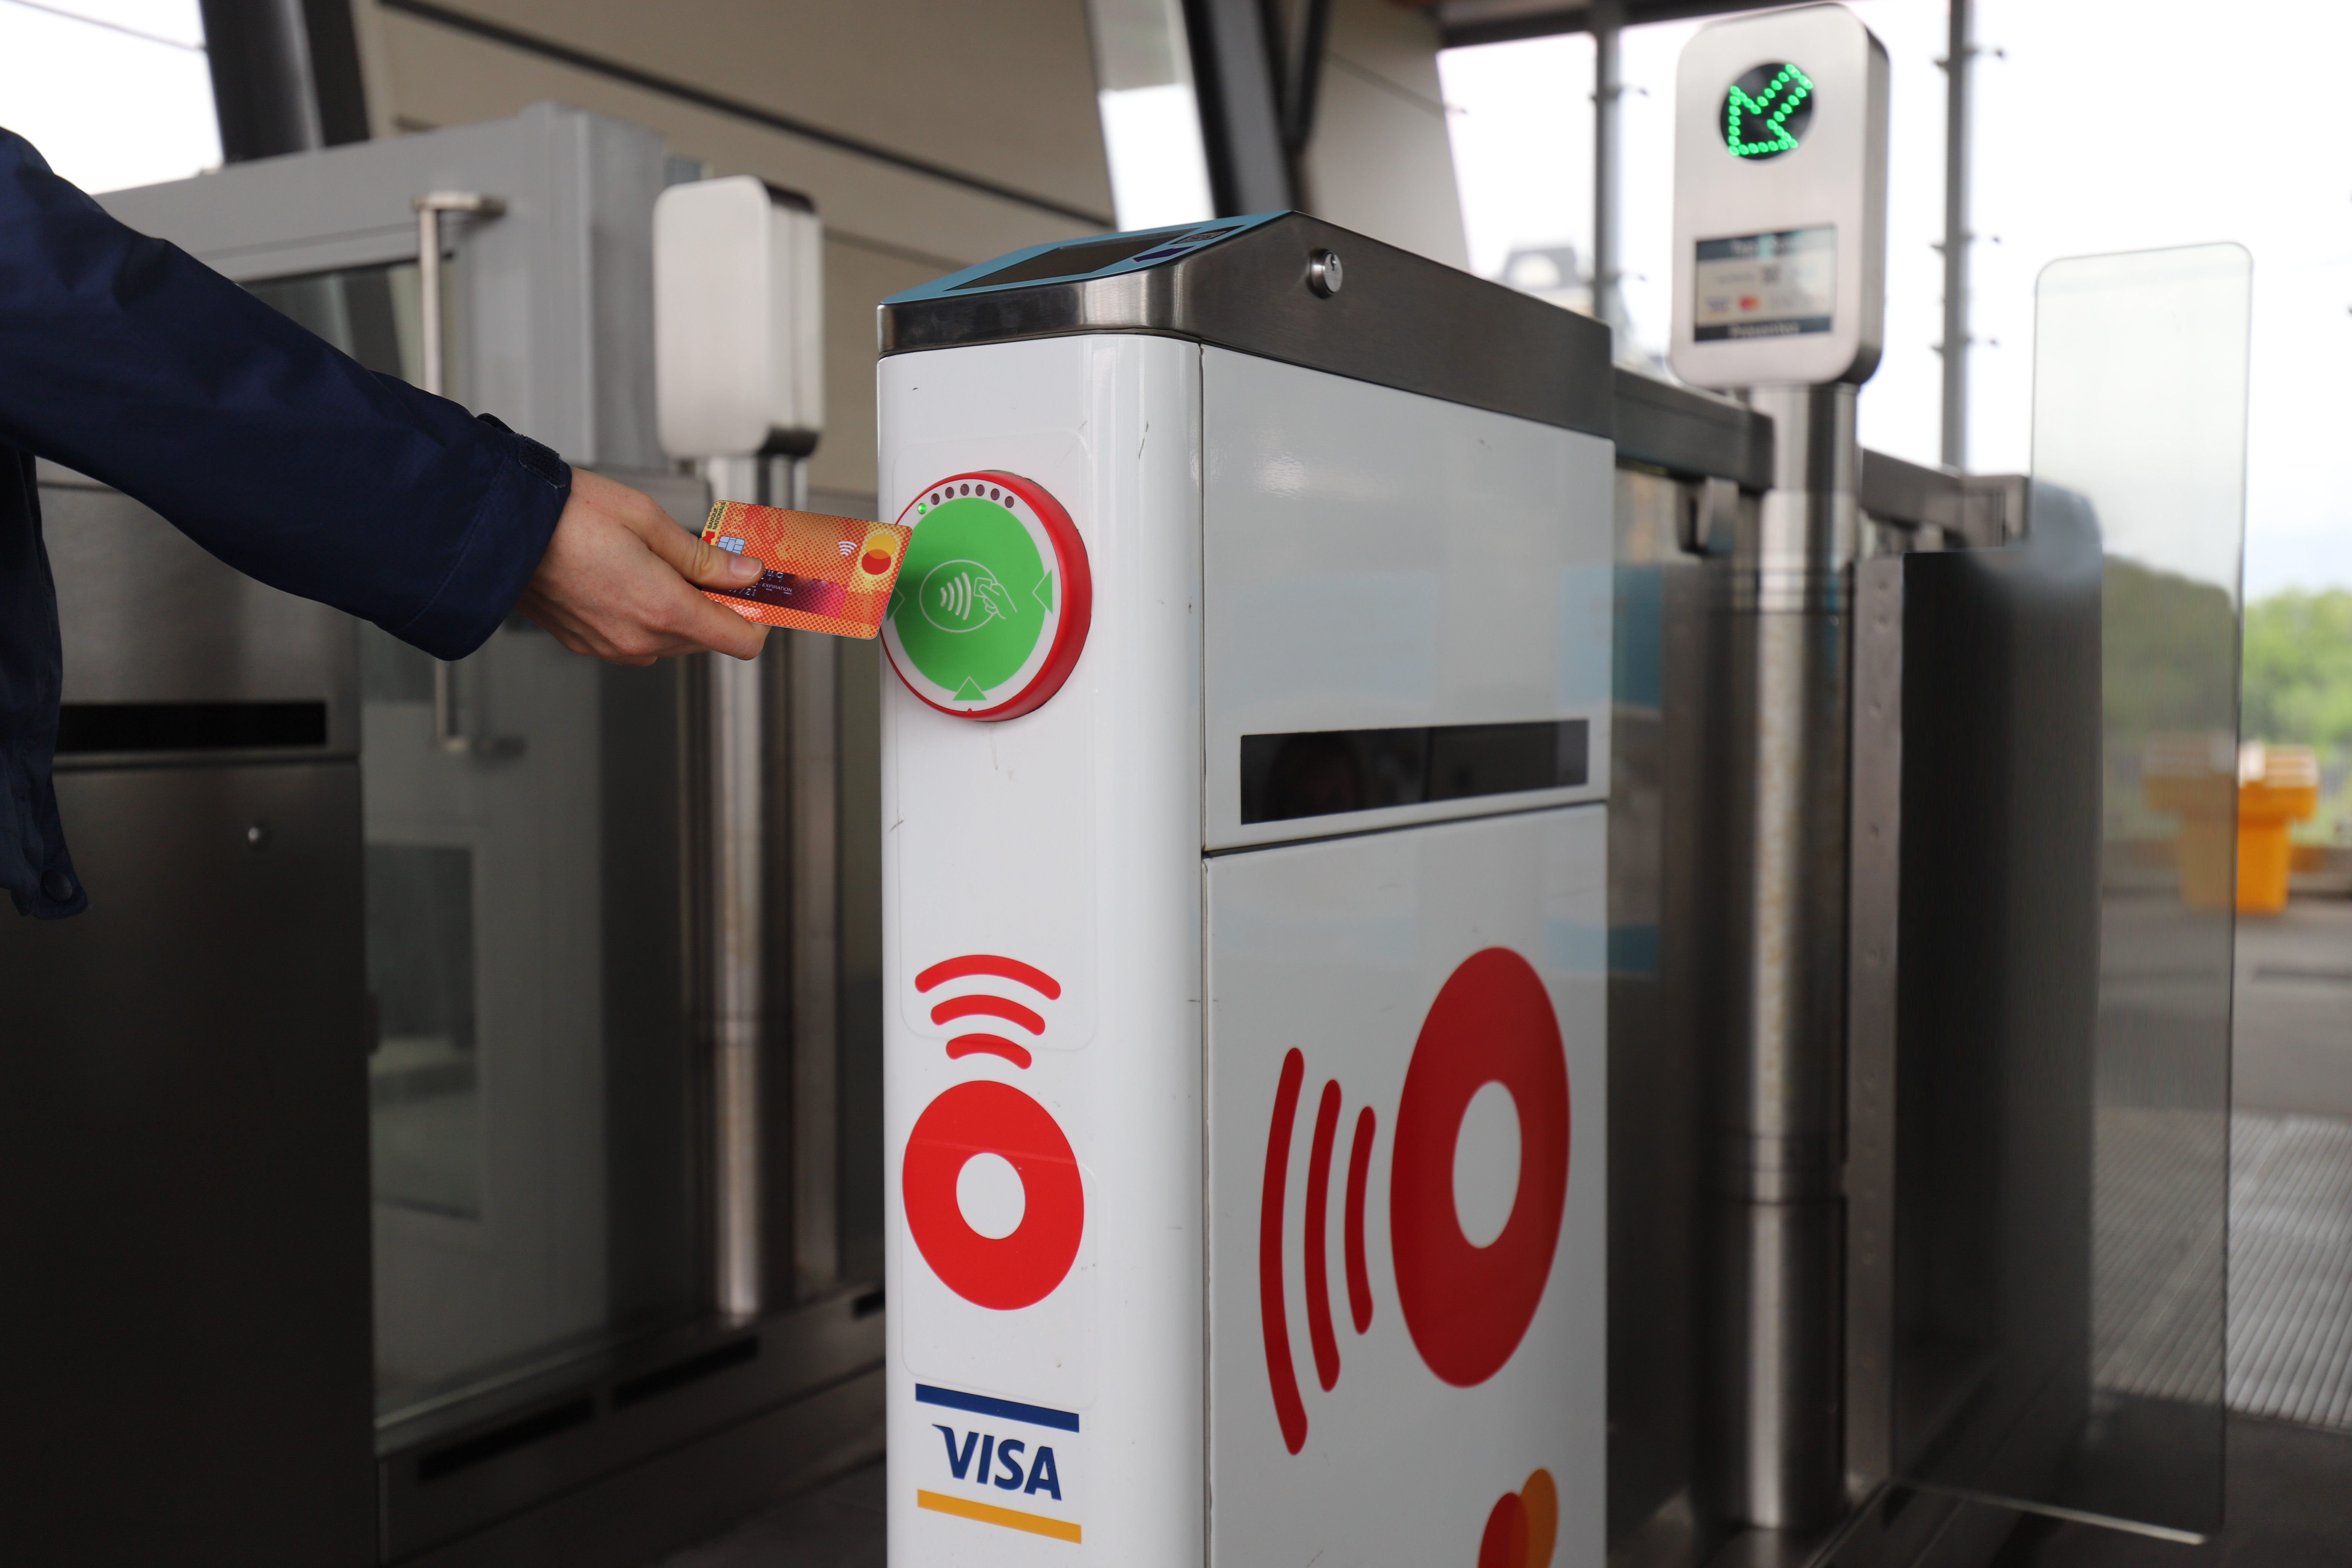 Look for the specially marked white fare gates which have already been activated to accept credit card and mobile phone taps.